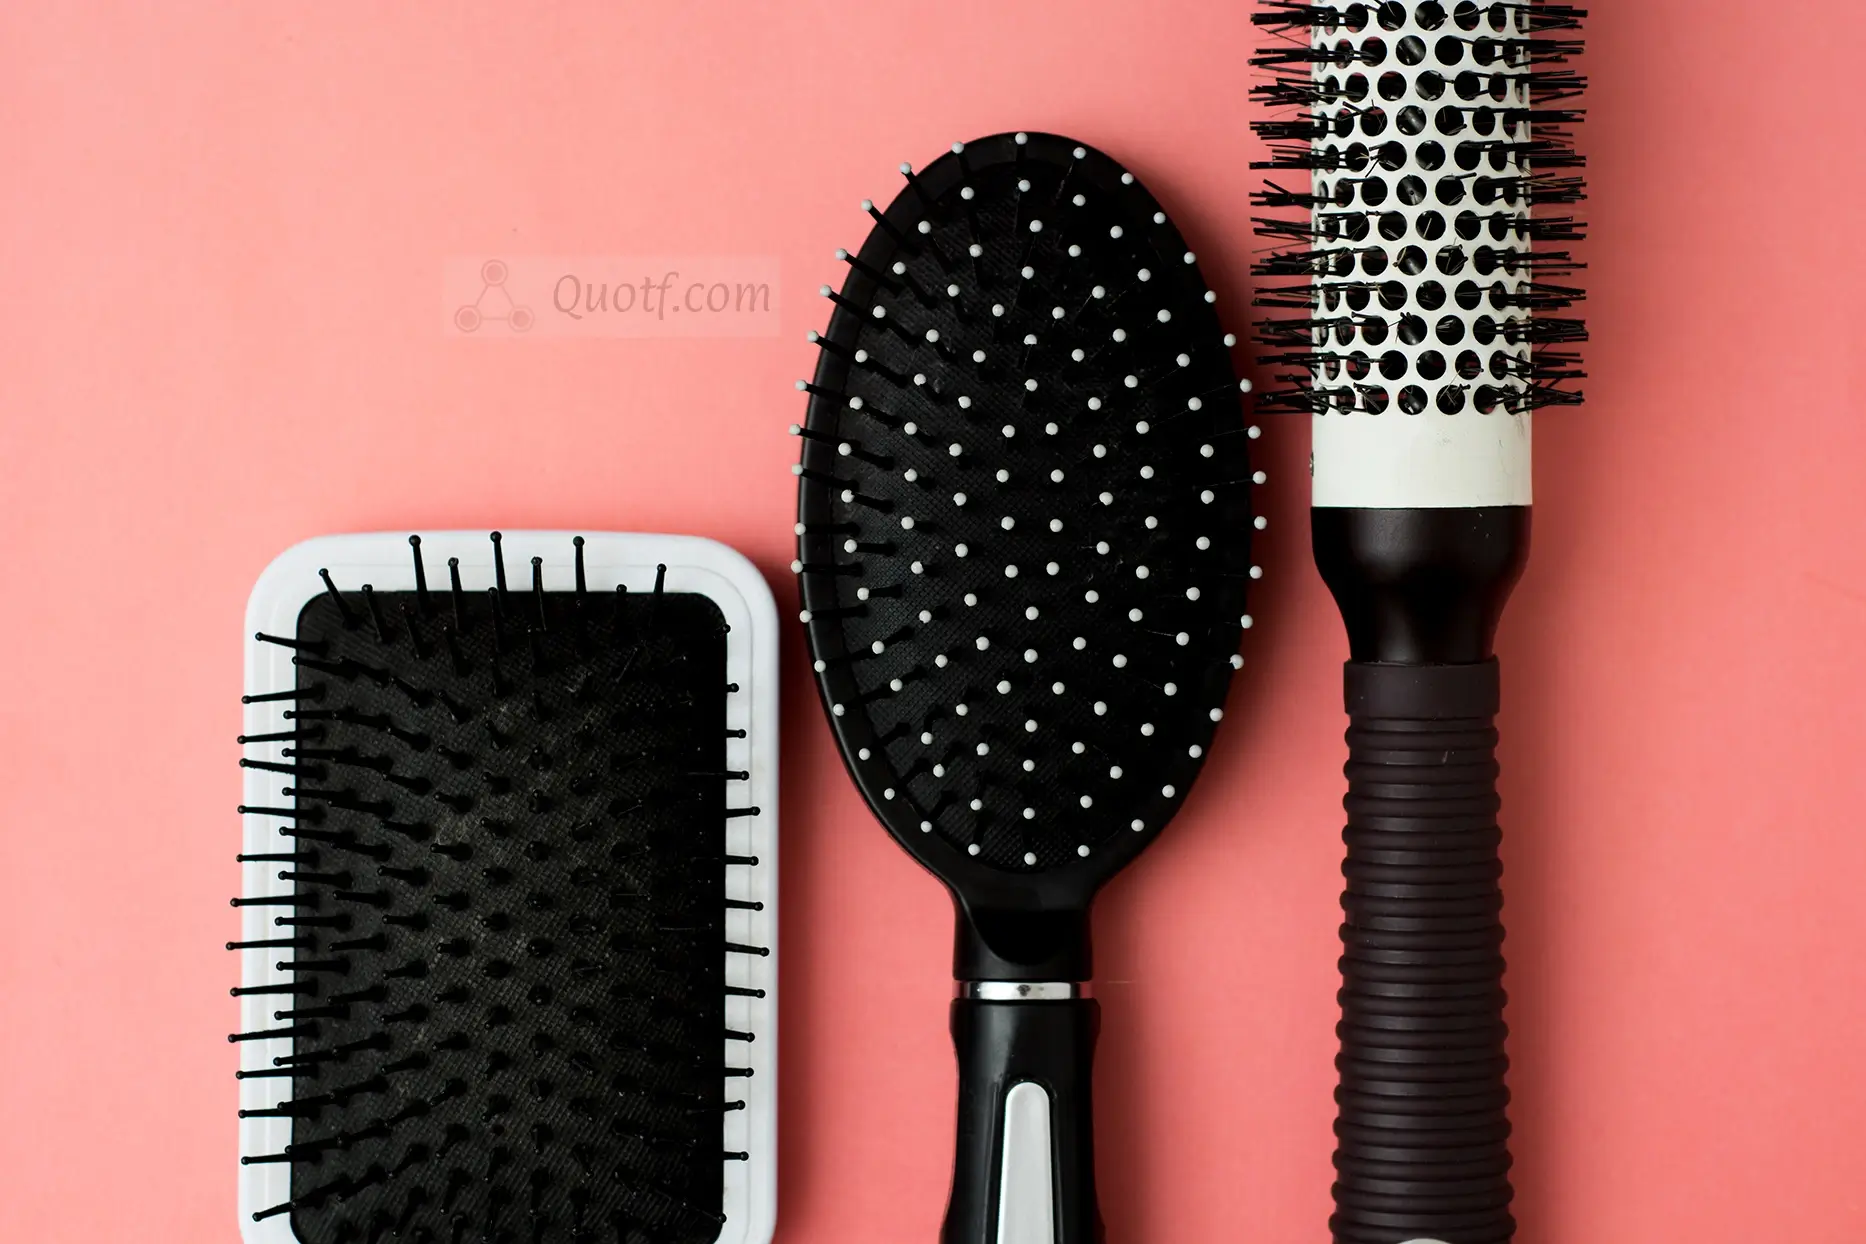 A hairbrush: How It Helps Your Hair